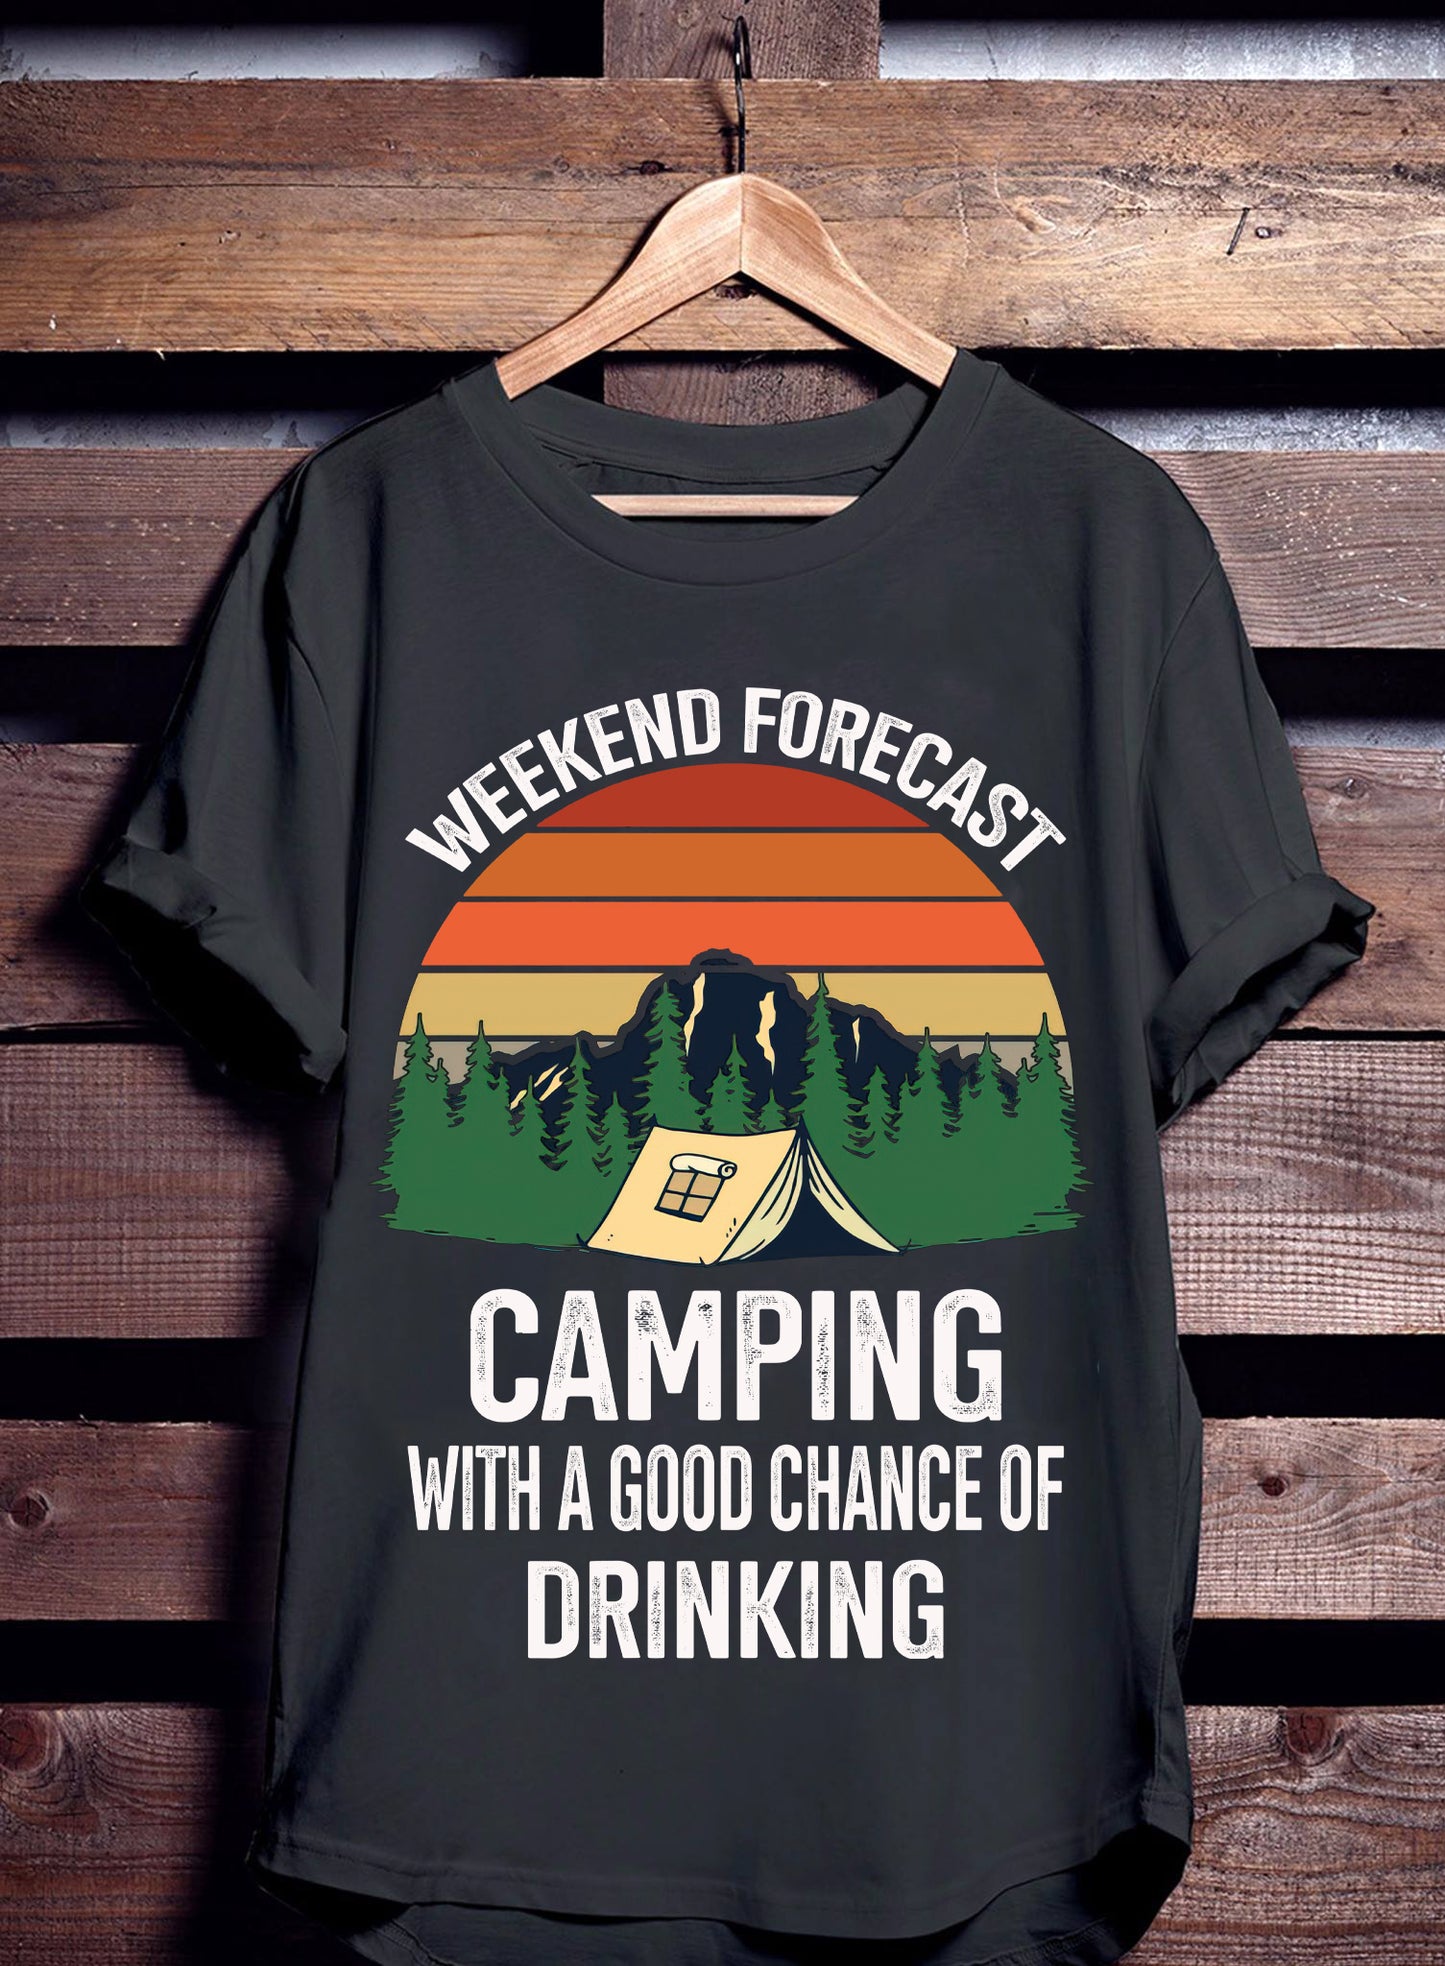 Weekend Forecast Camping With A Chance Of Drinking T-shirt - Campfire Shirt - Making Memories Shirt - Shirt For Family - Happy Camper - Ciaocustom